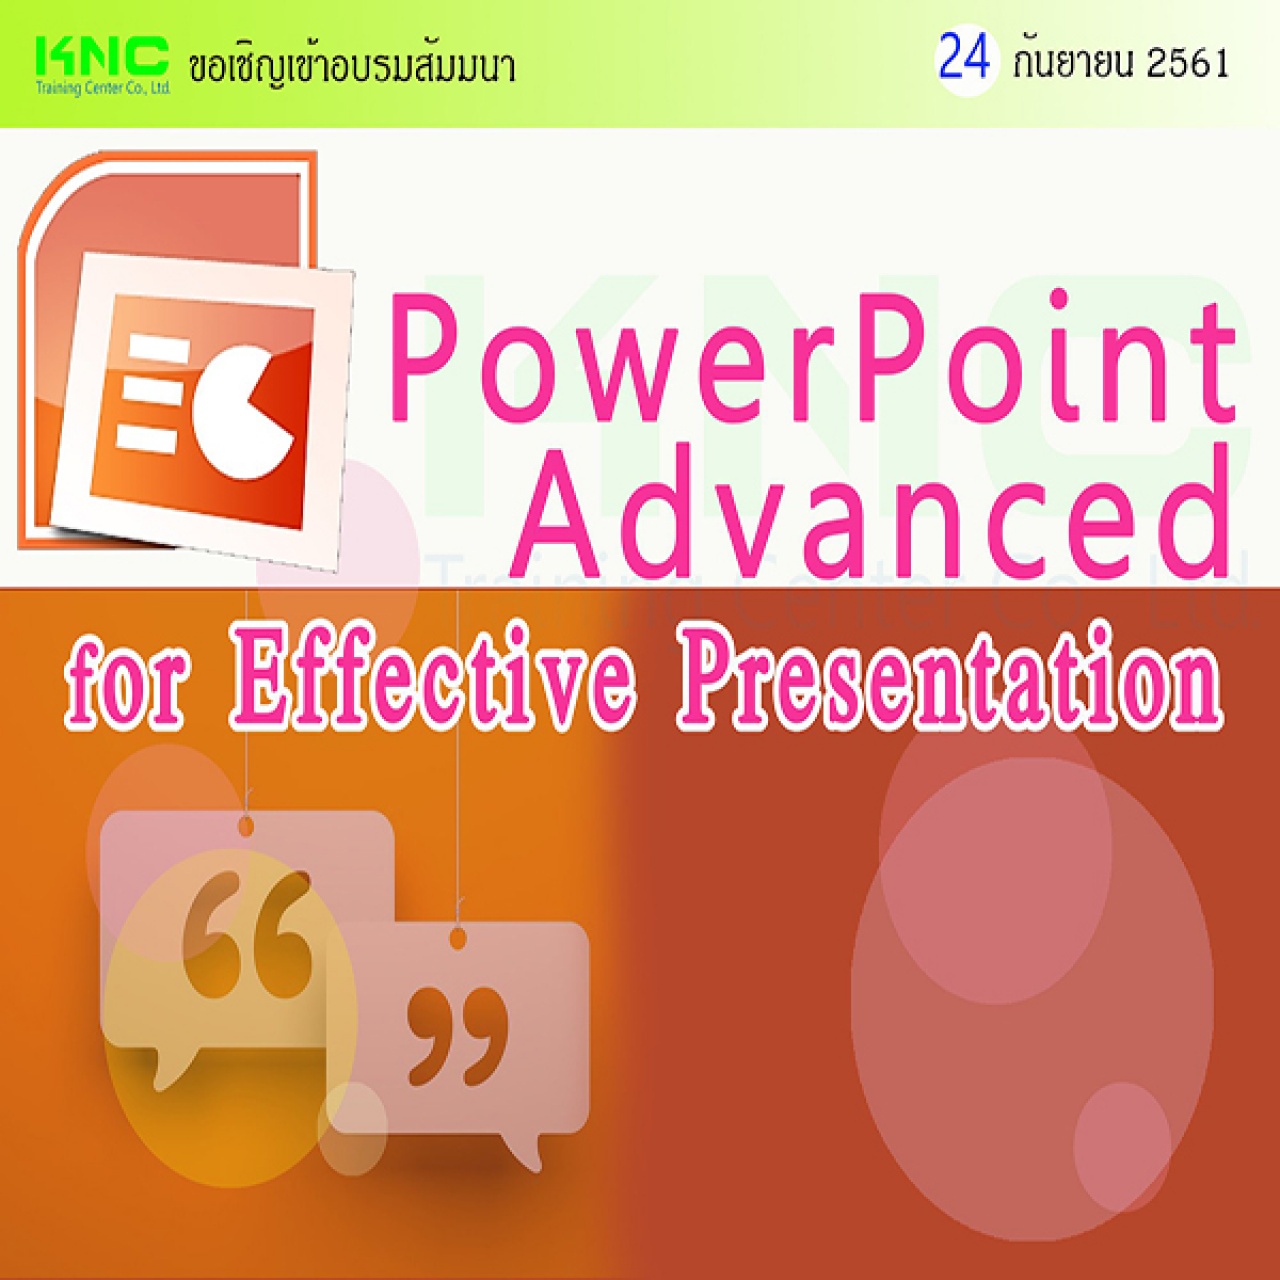 PowerPoint Advanced for Effective Presentation